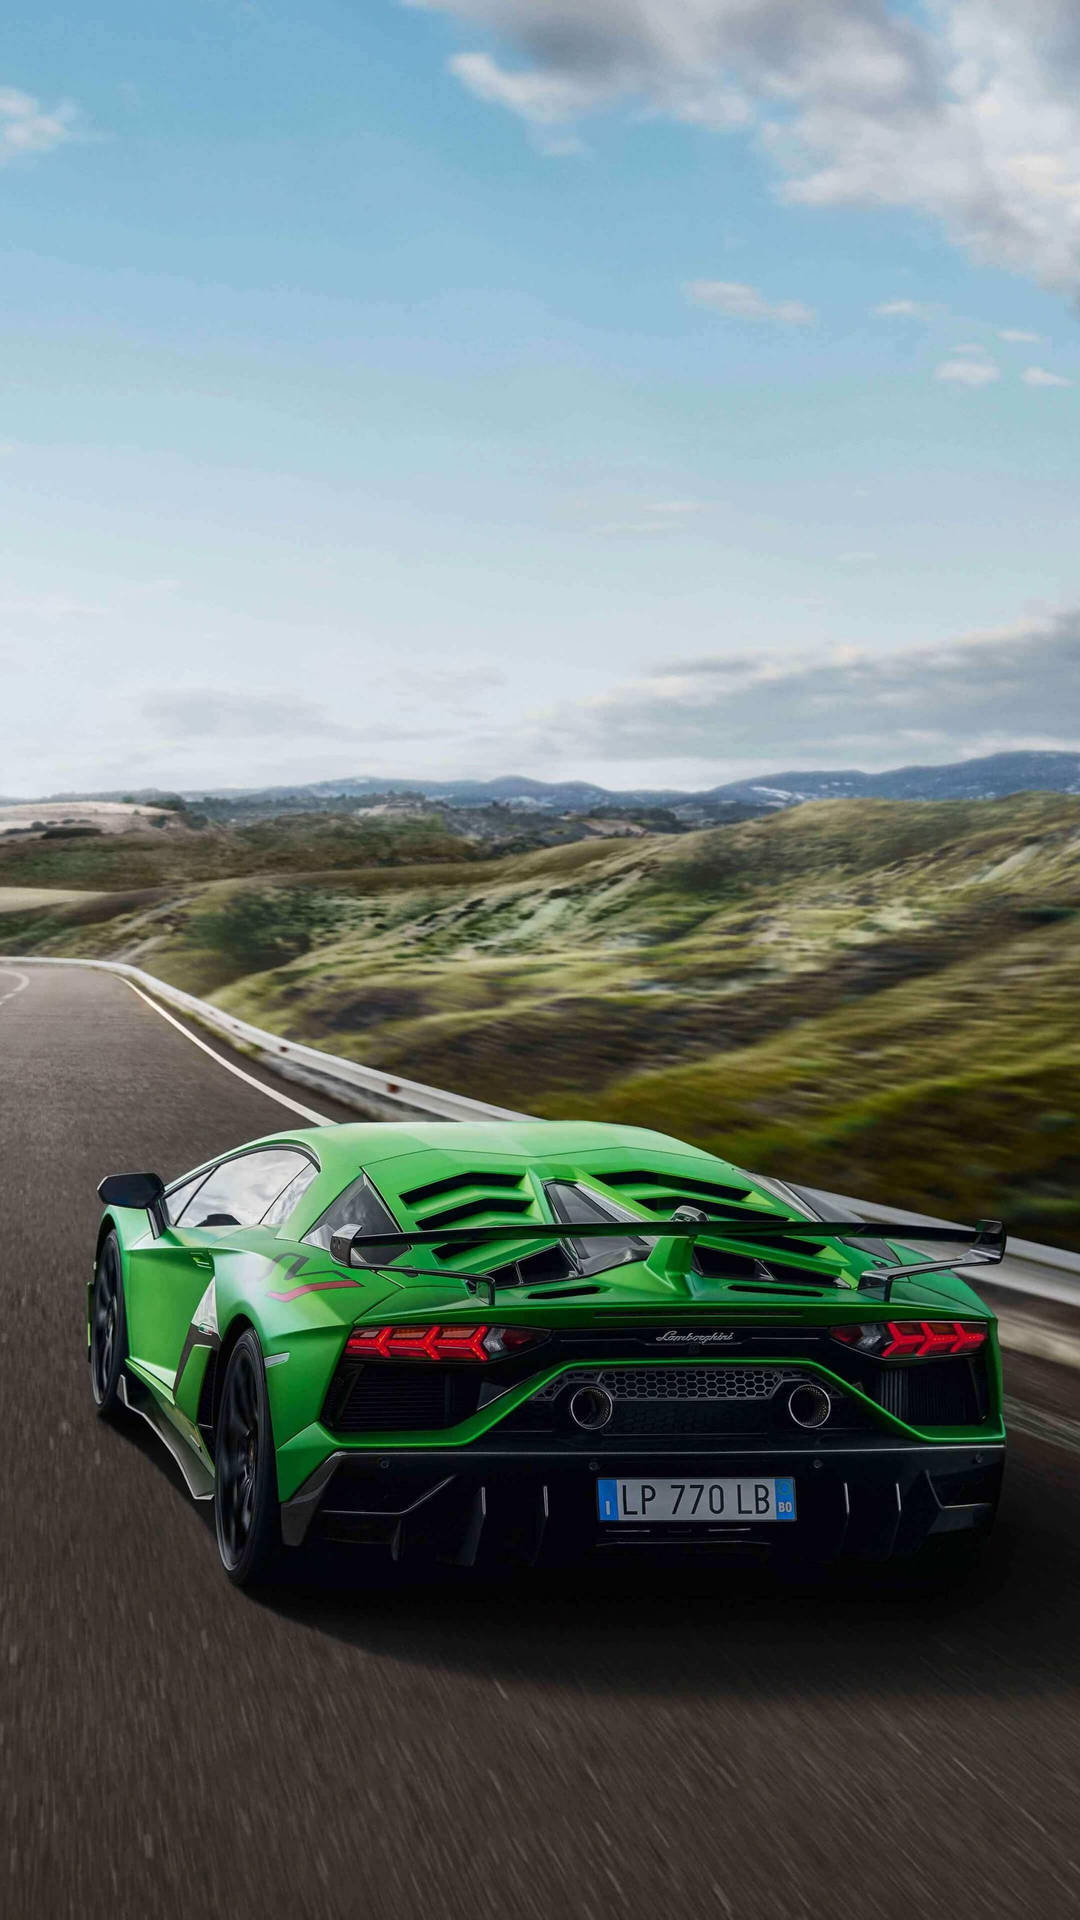 Enjoy the luxury of a Lamborghini - now on your iPhone Wallpaper